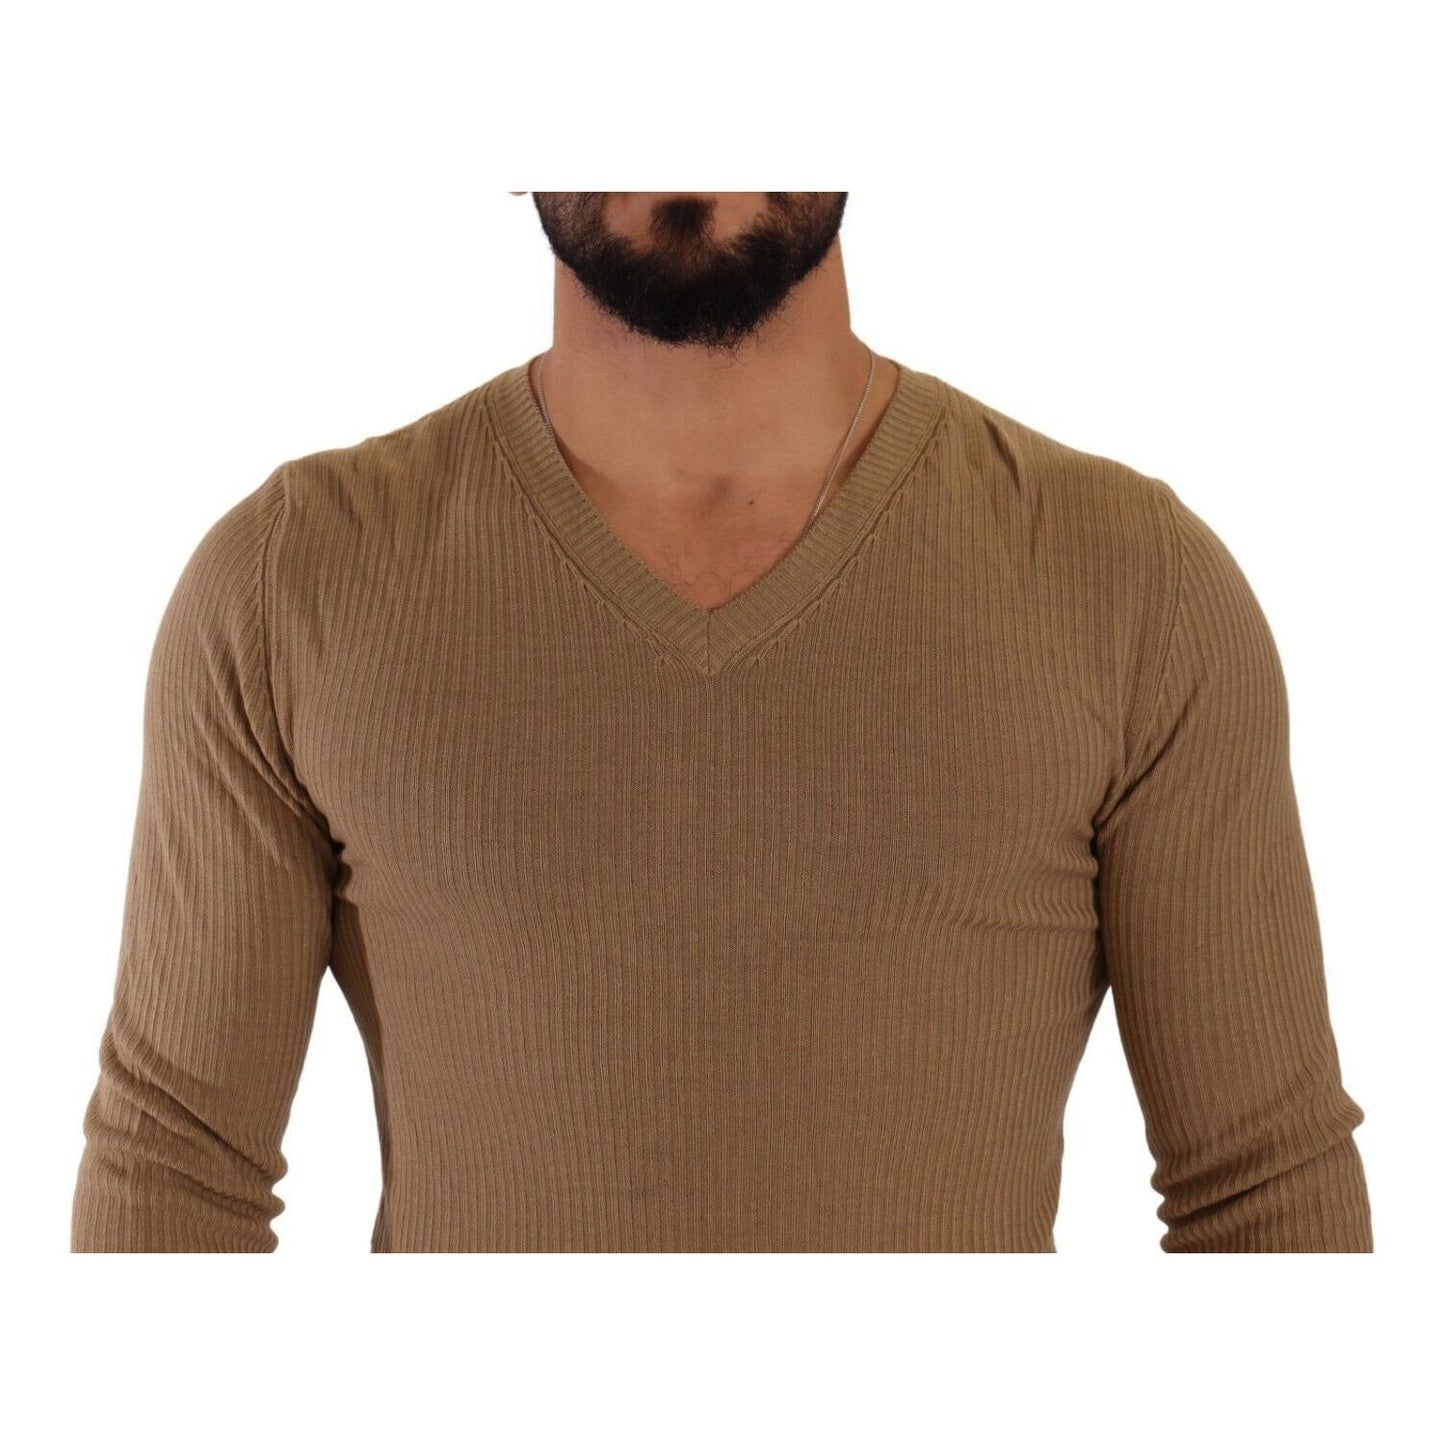 Ermanno Scervino Classic V-Neck Wool Sweater in Brown brown-wool-knit-v-neck-men-pullover-sweater s-l1600-63-1-fc8b0b10-453.jpg